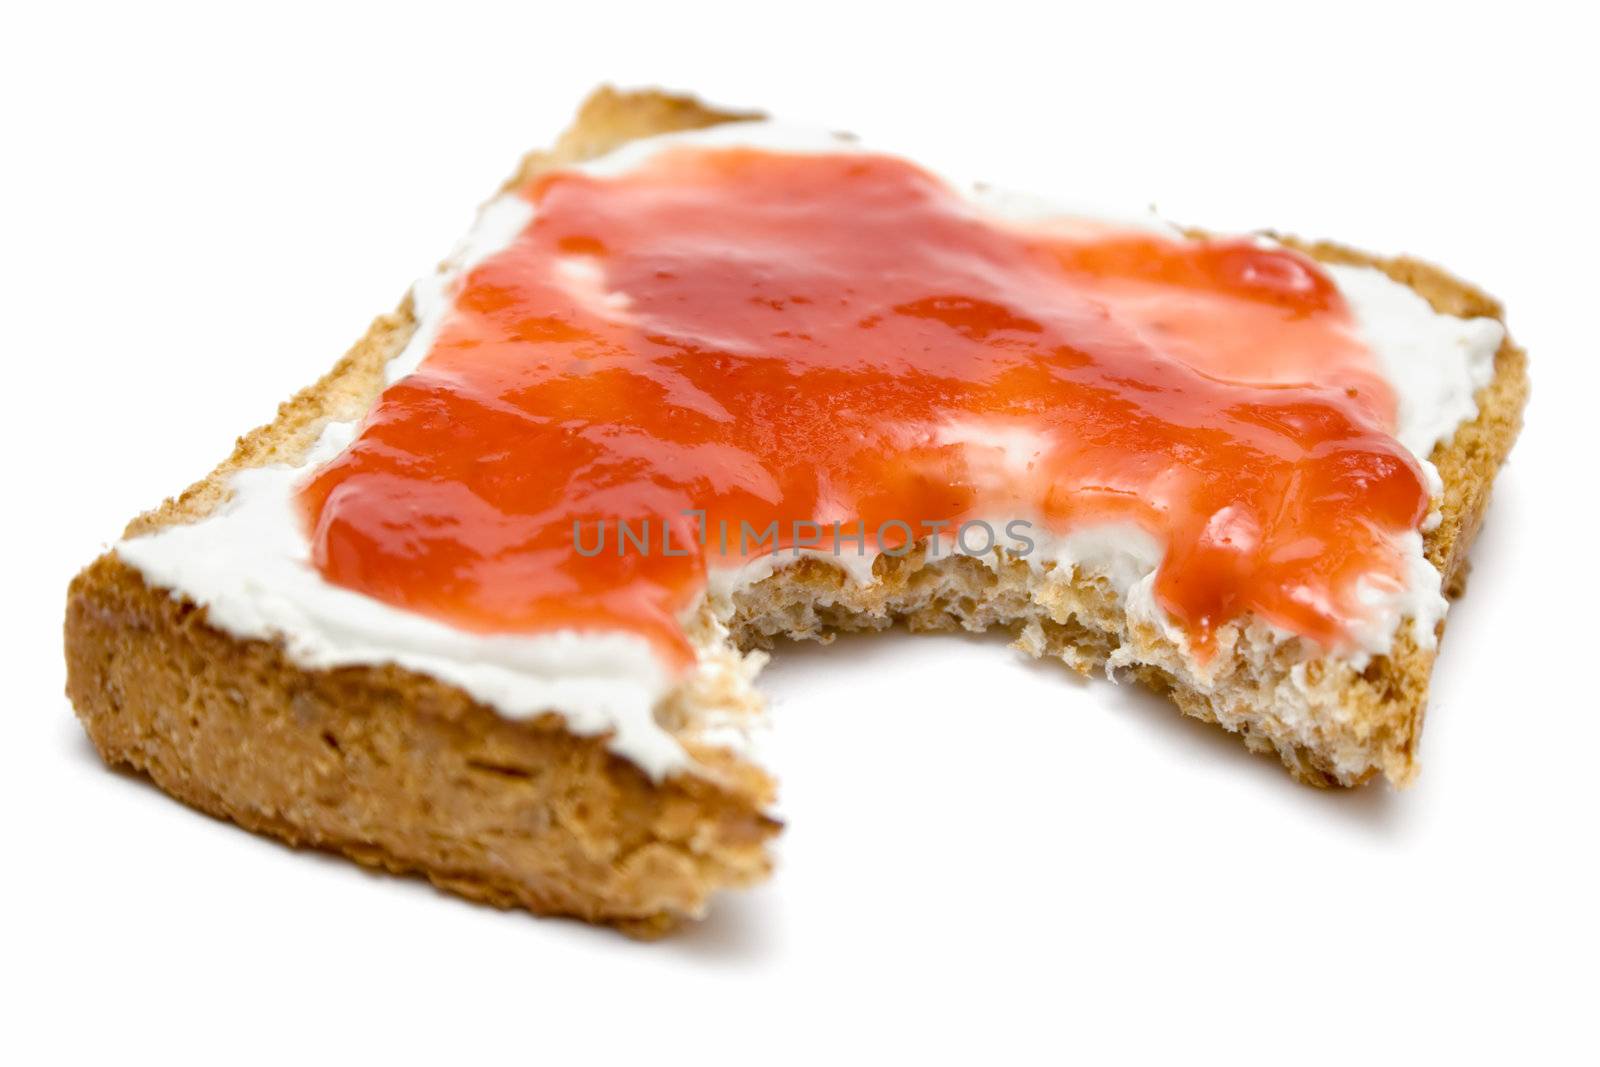 Eating a toast with butter and jam. Isolated on a white background.